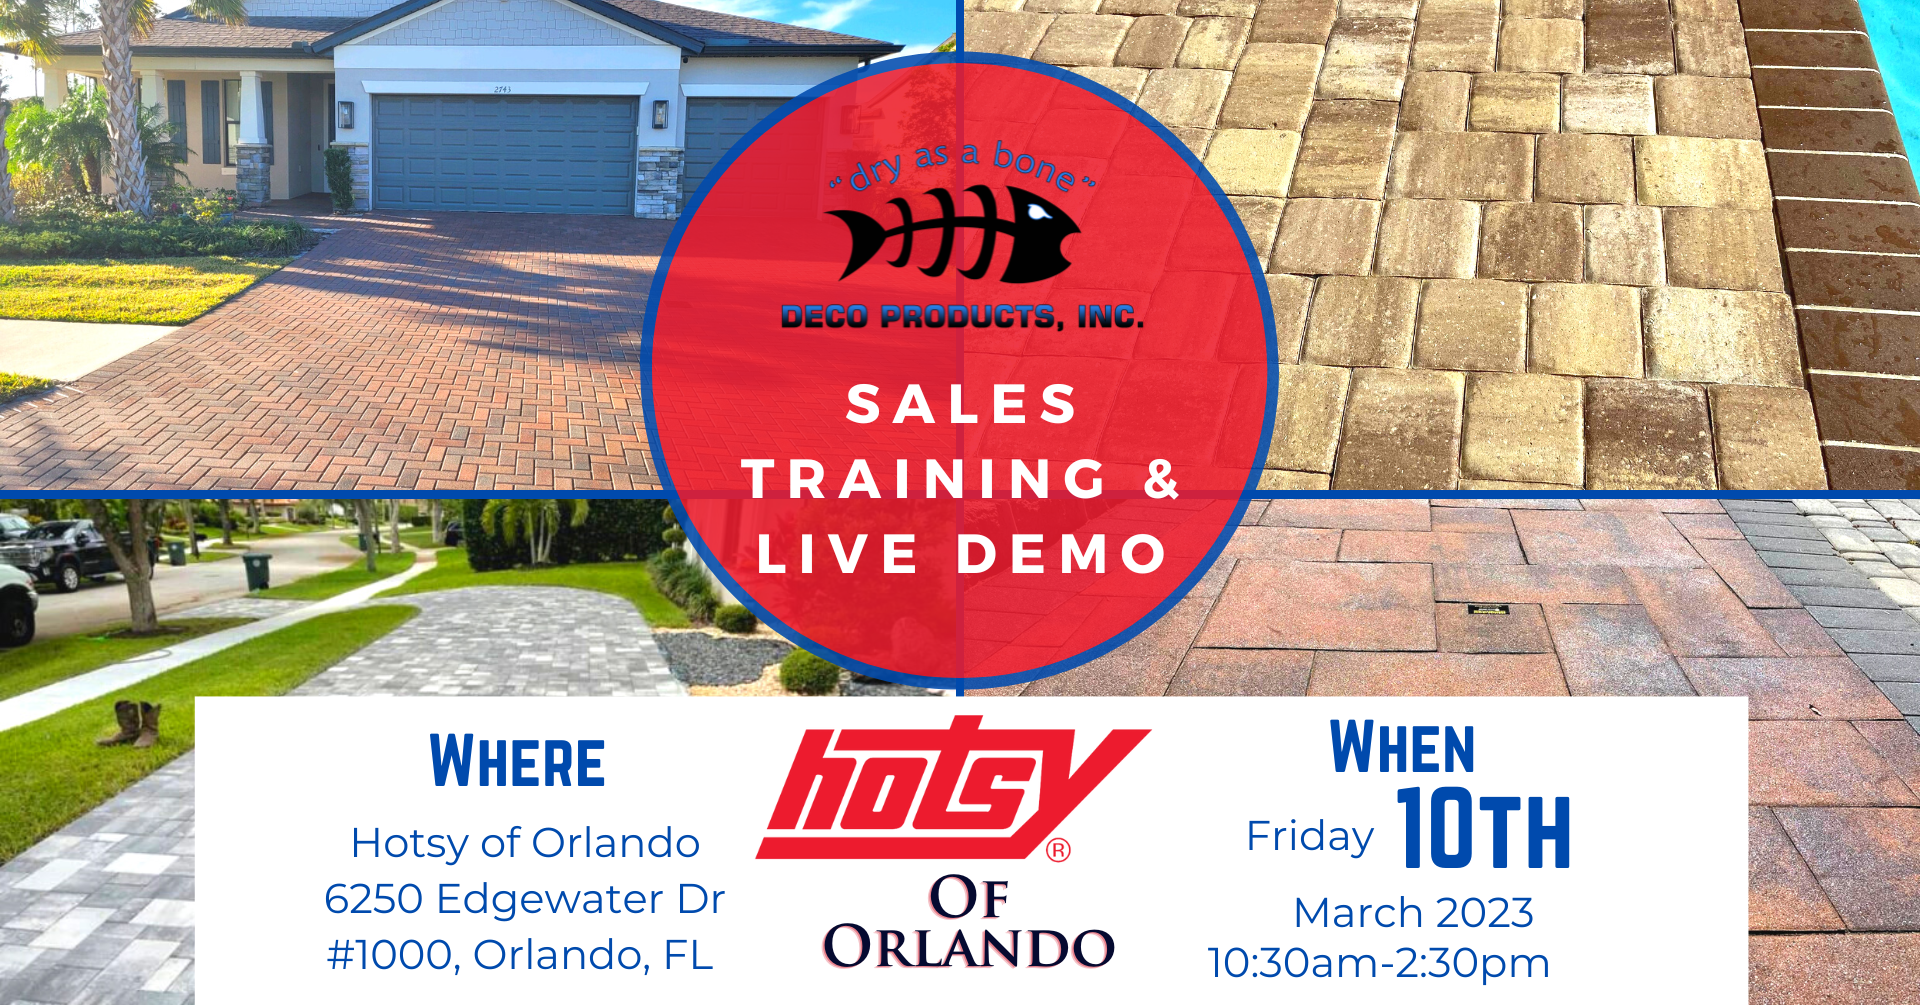 flyer promoting a sales training and live demo event in Orlando, FL